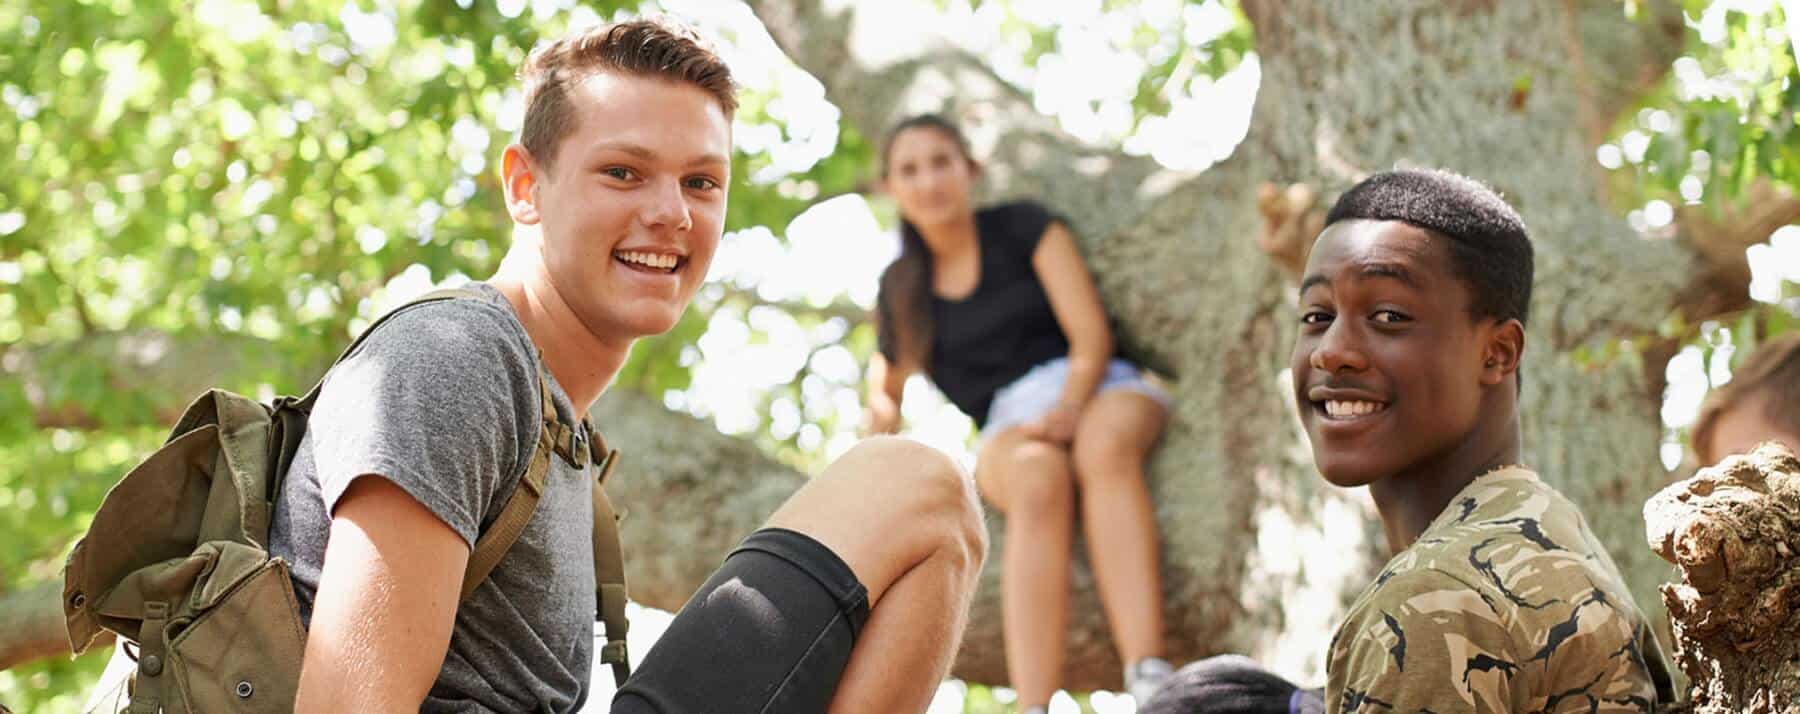 Three adolescents in recovery from drugs and alcohol sitting in a tree and hanging out together